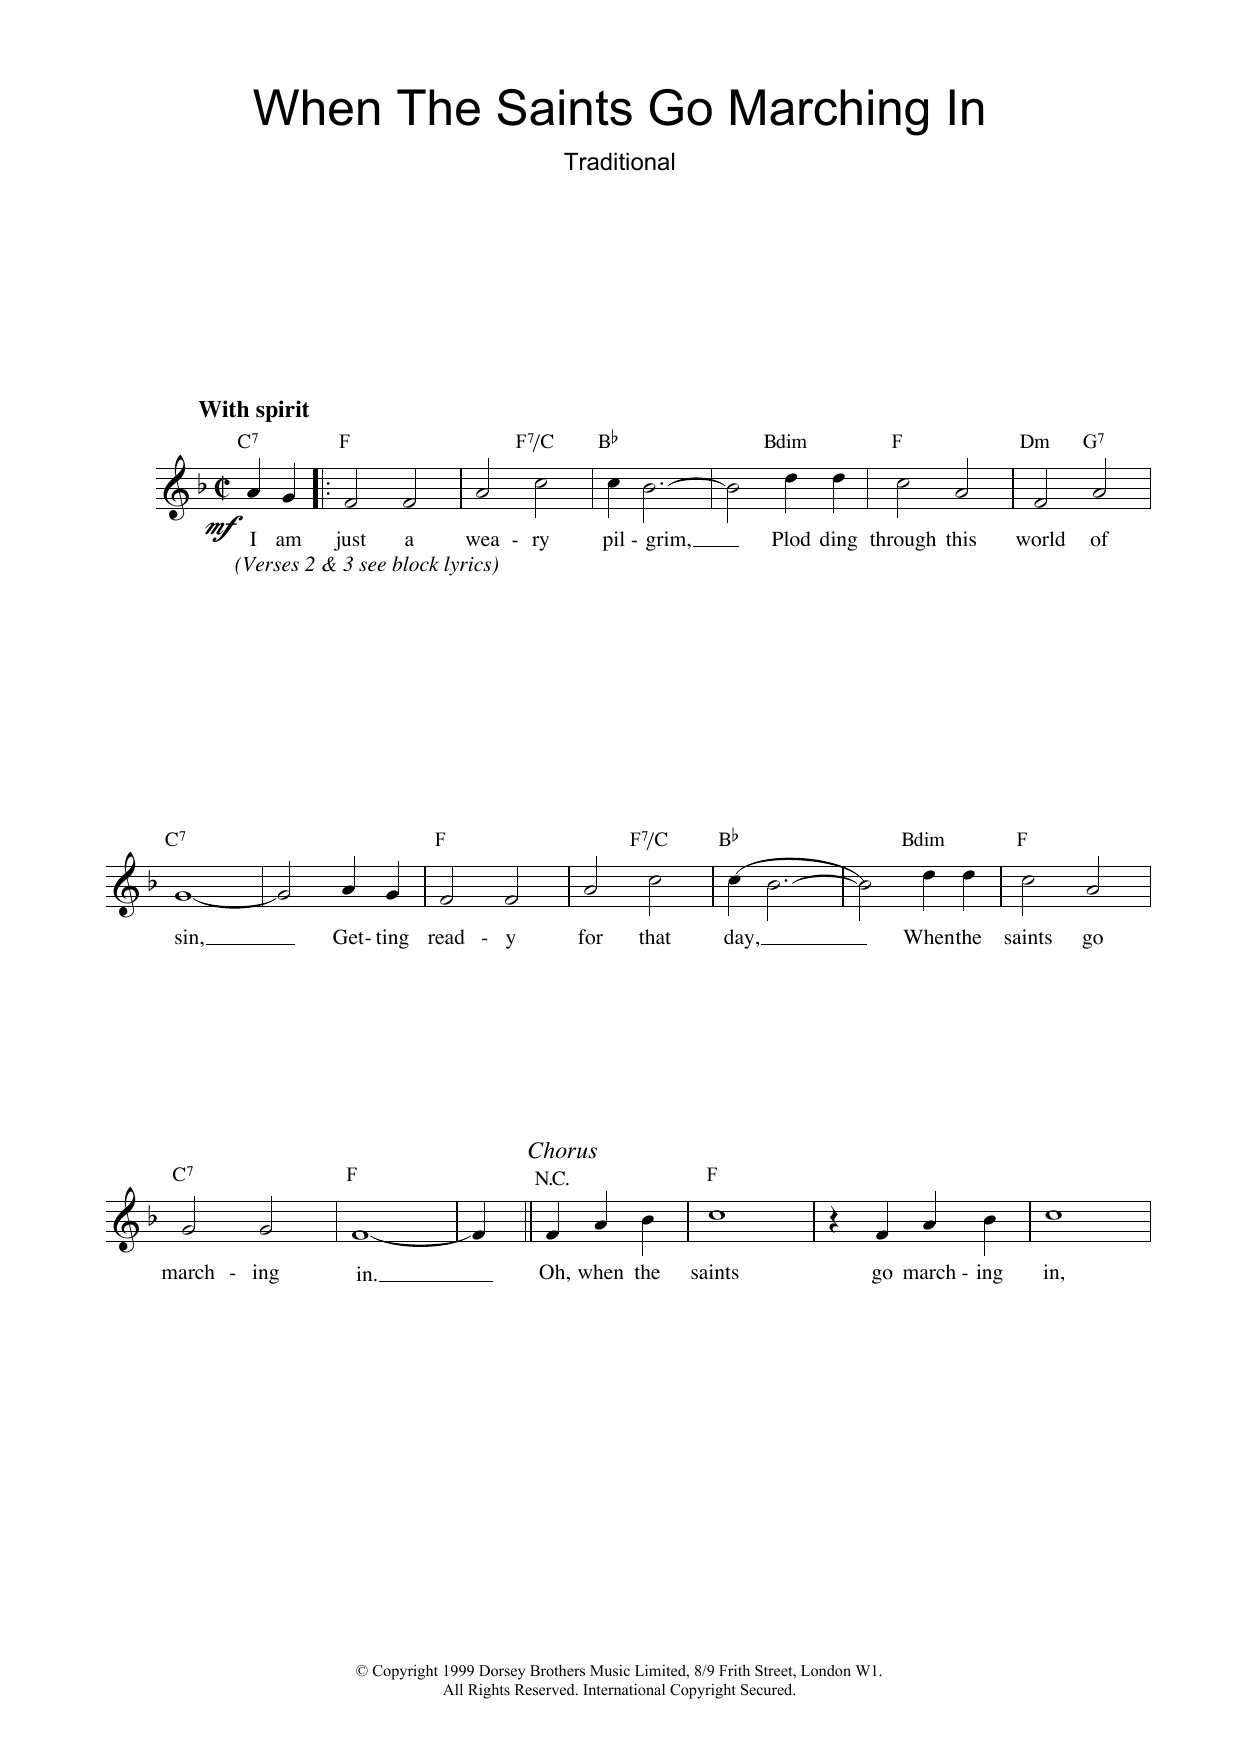 Download African-American Spiritual When The Saints Go Marching In Sheet Music